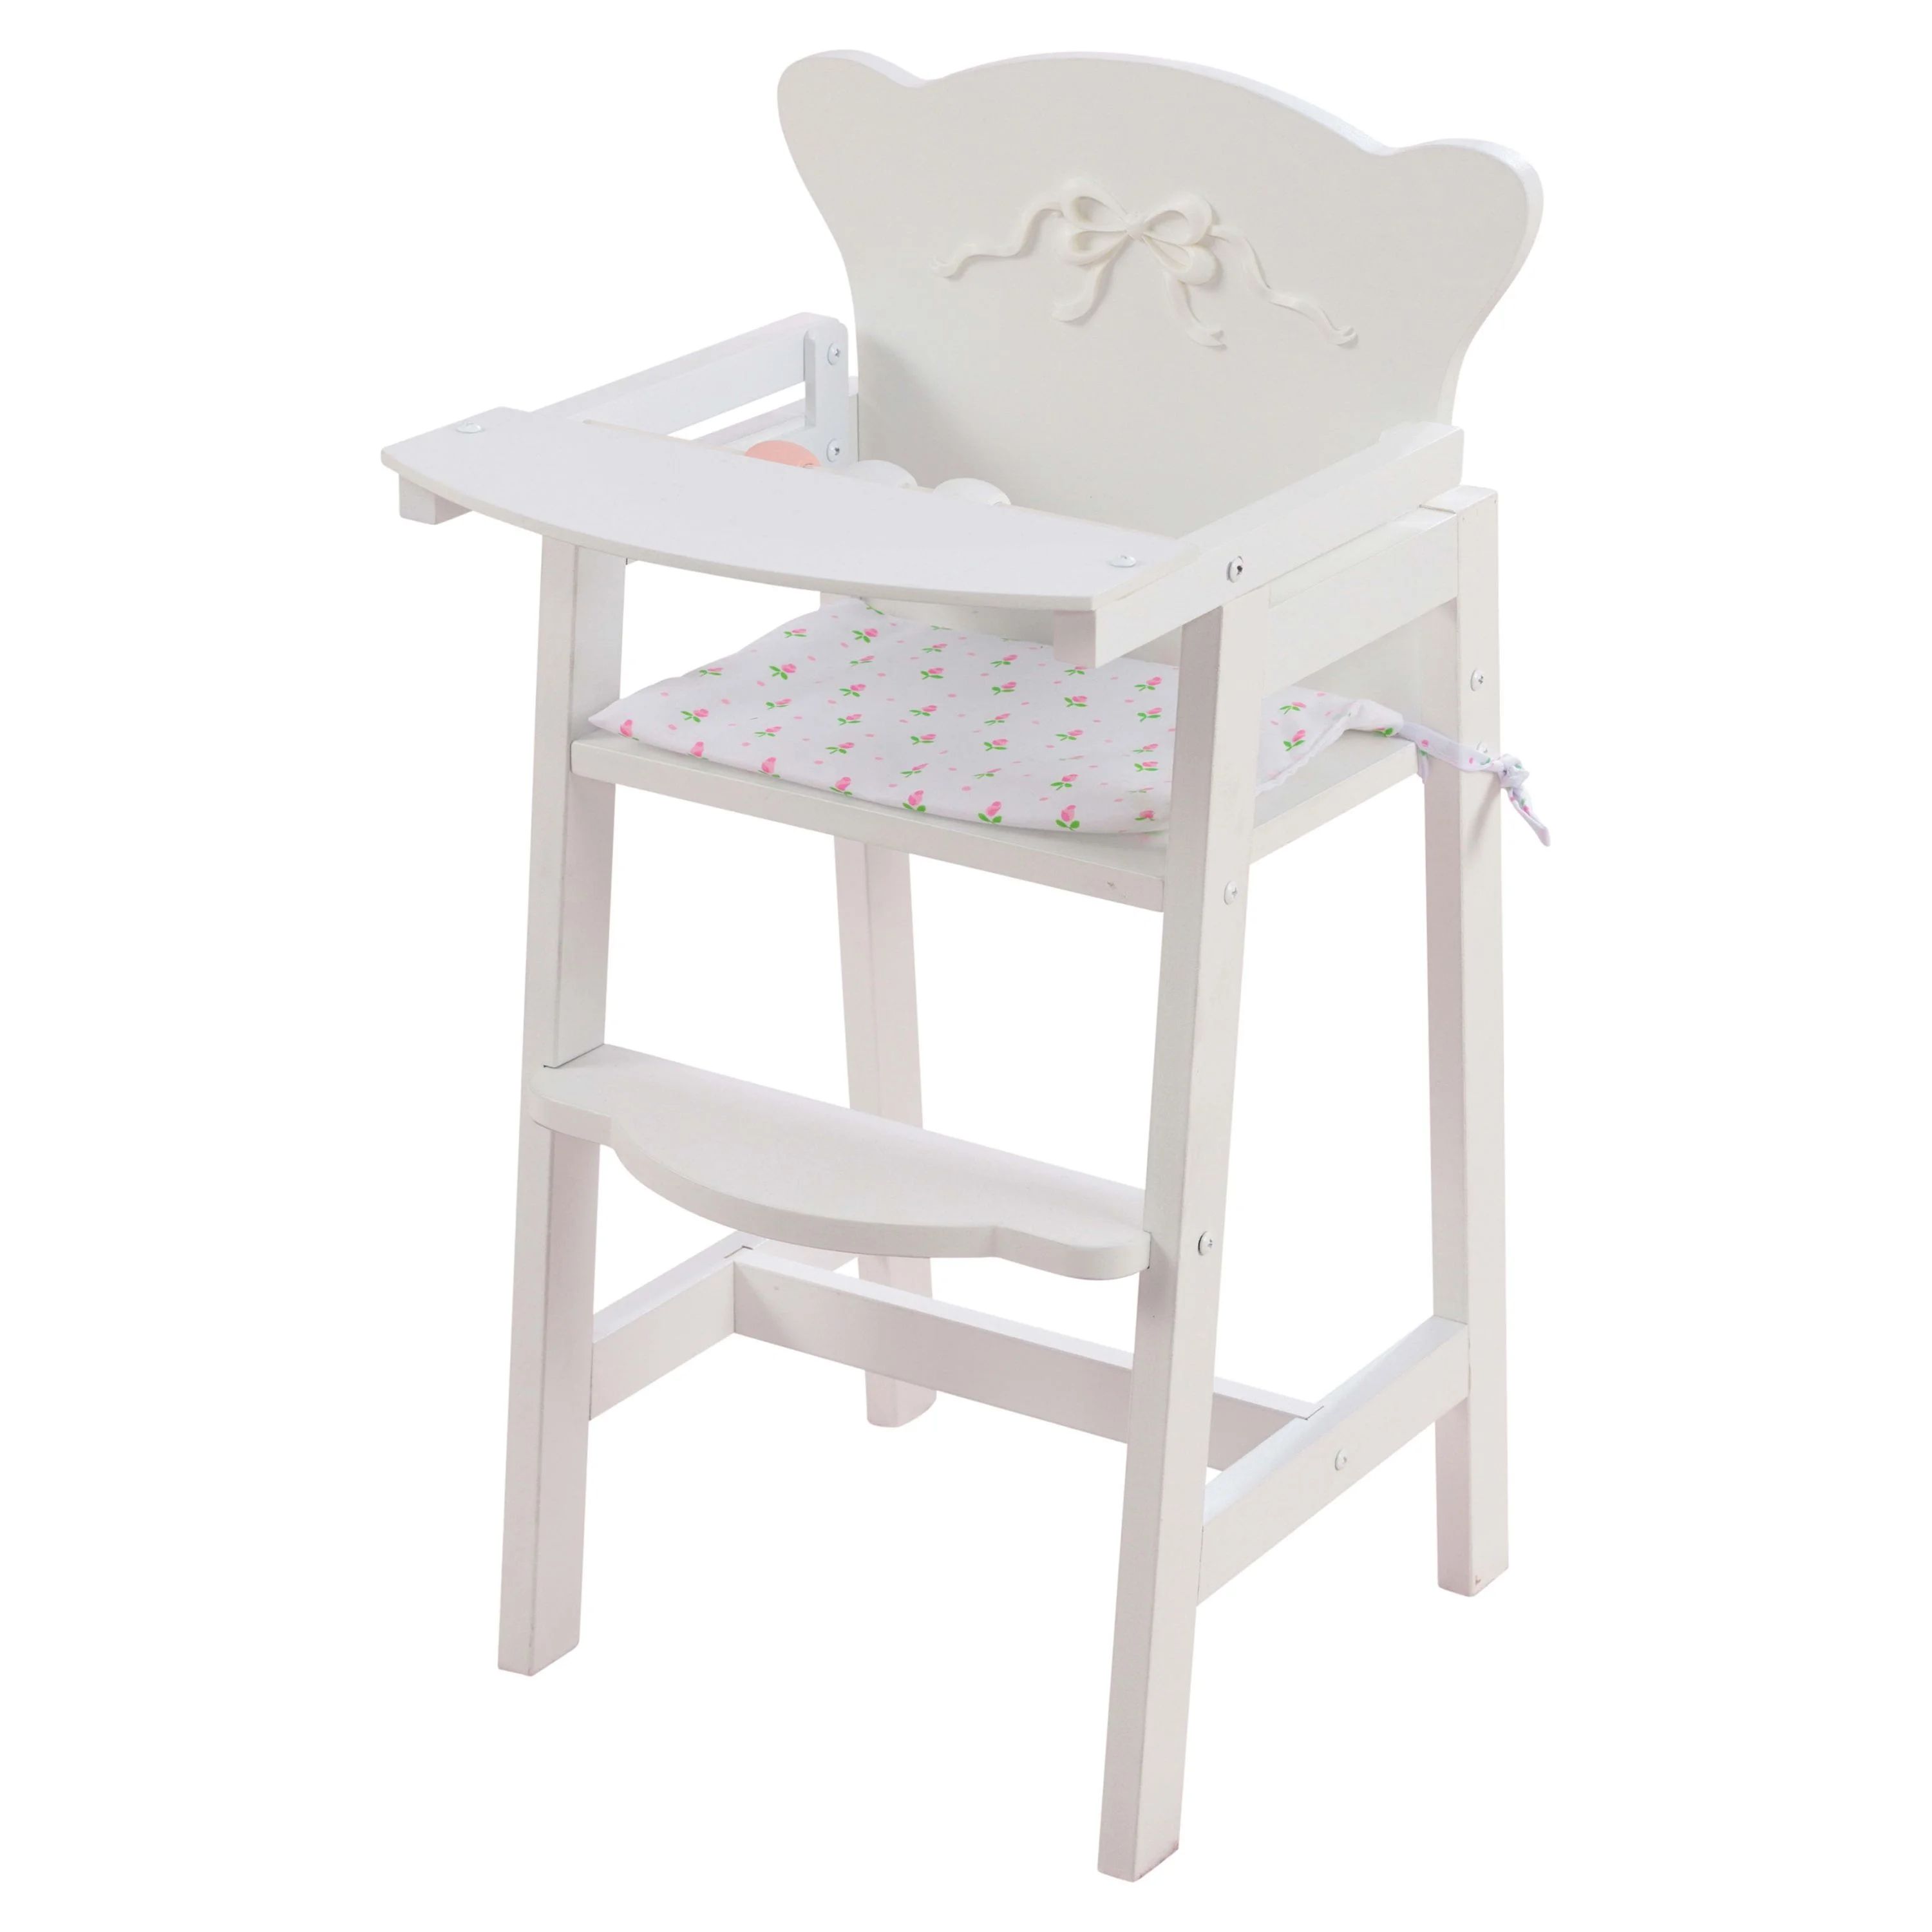 KidKraft Tiffany Bow Scalloped-Edge Wooden Lil Doll High Chair with Seat Pad - White | Walmart (US)